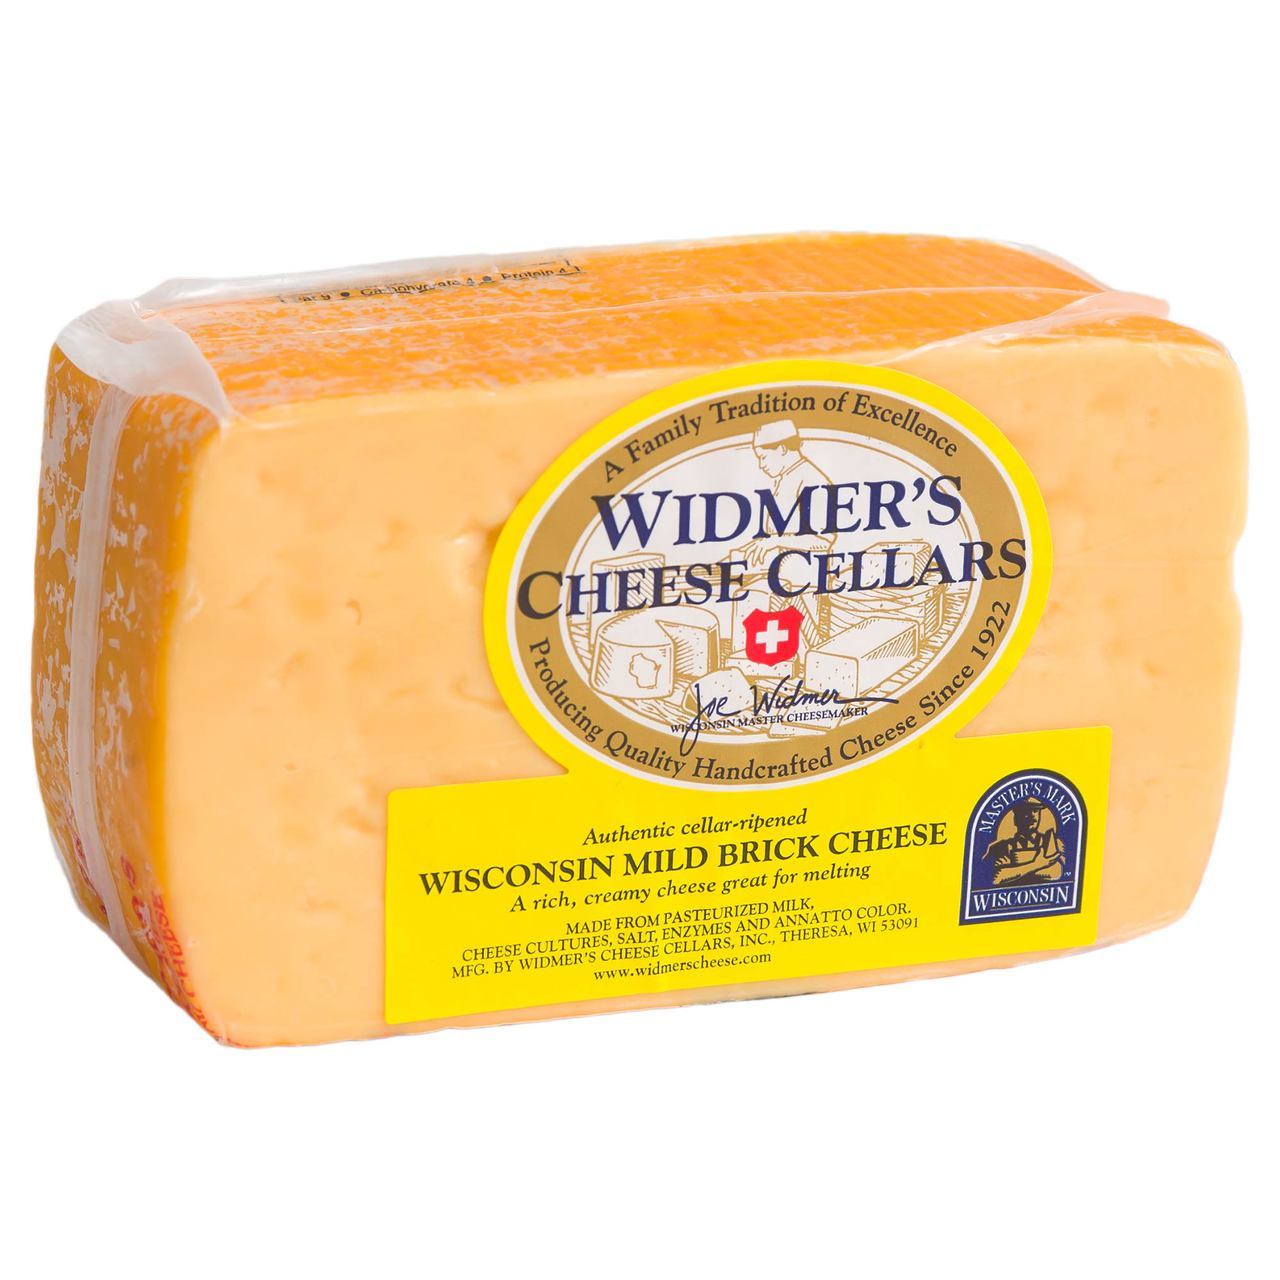 15 Most Imported Cheeses in America